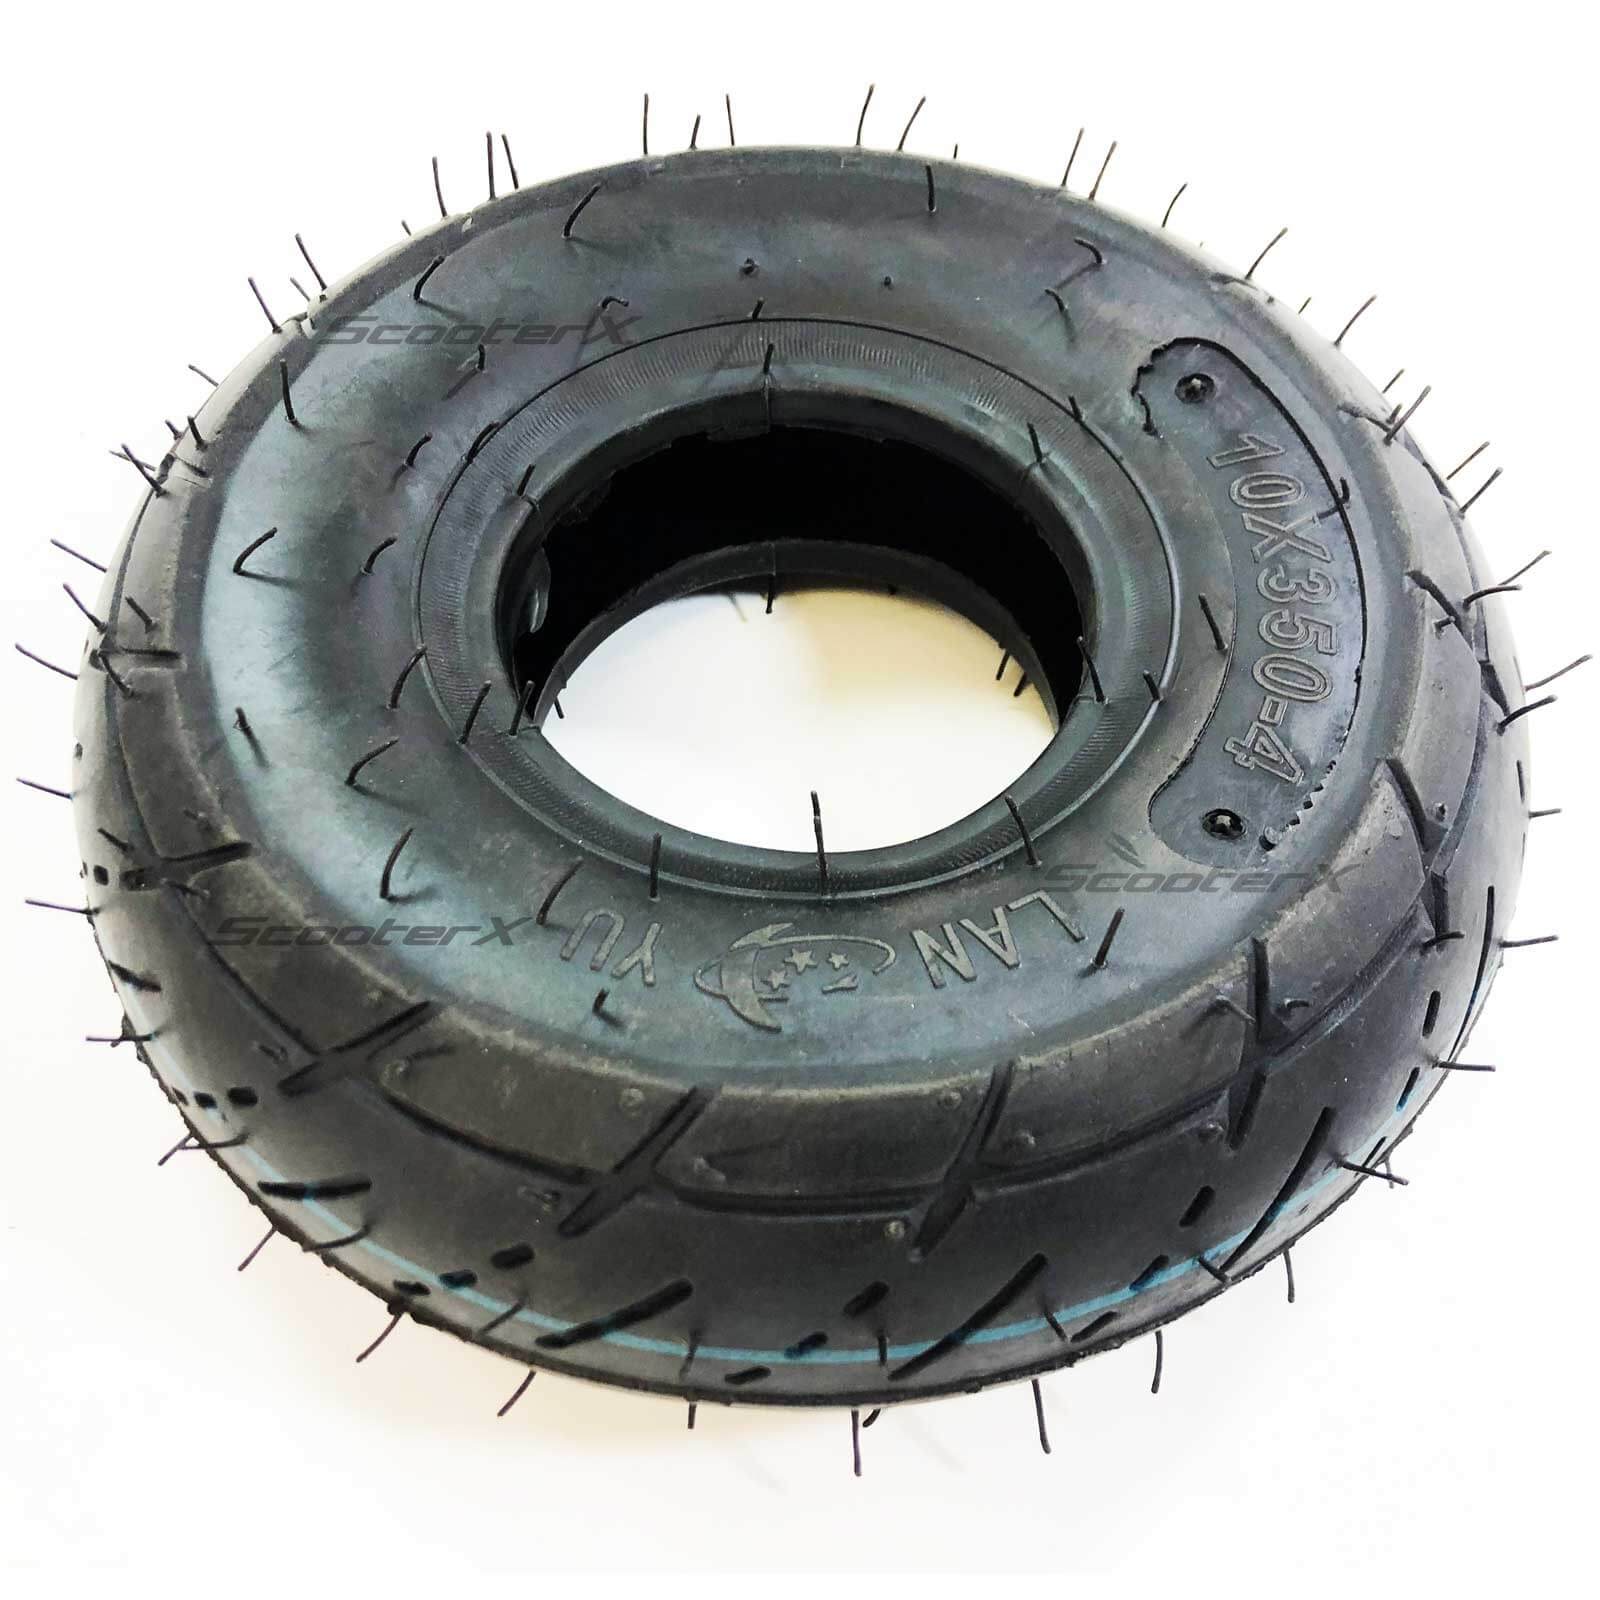 ScooterX 3.50 X 4 STREET TREAD TIRE For Gas/Electric Scooters